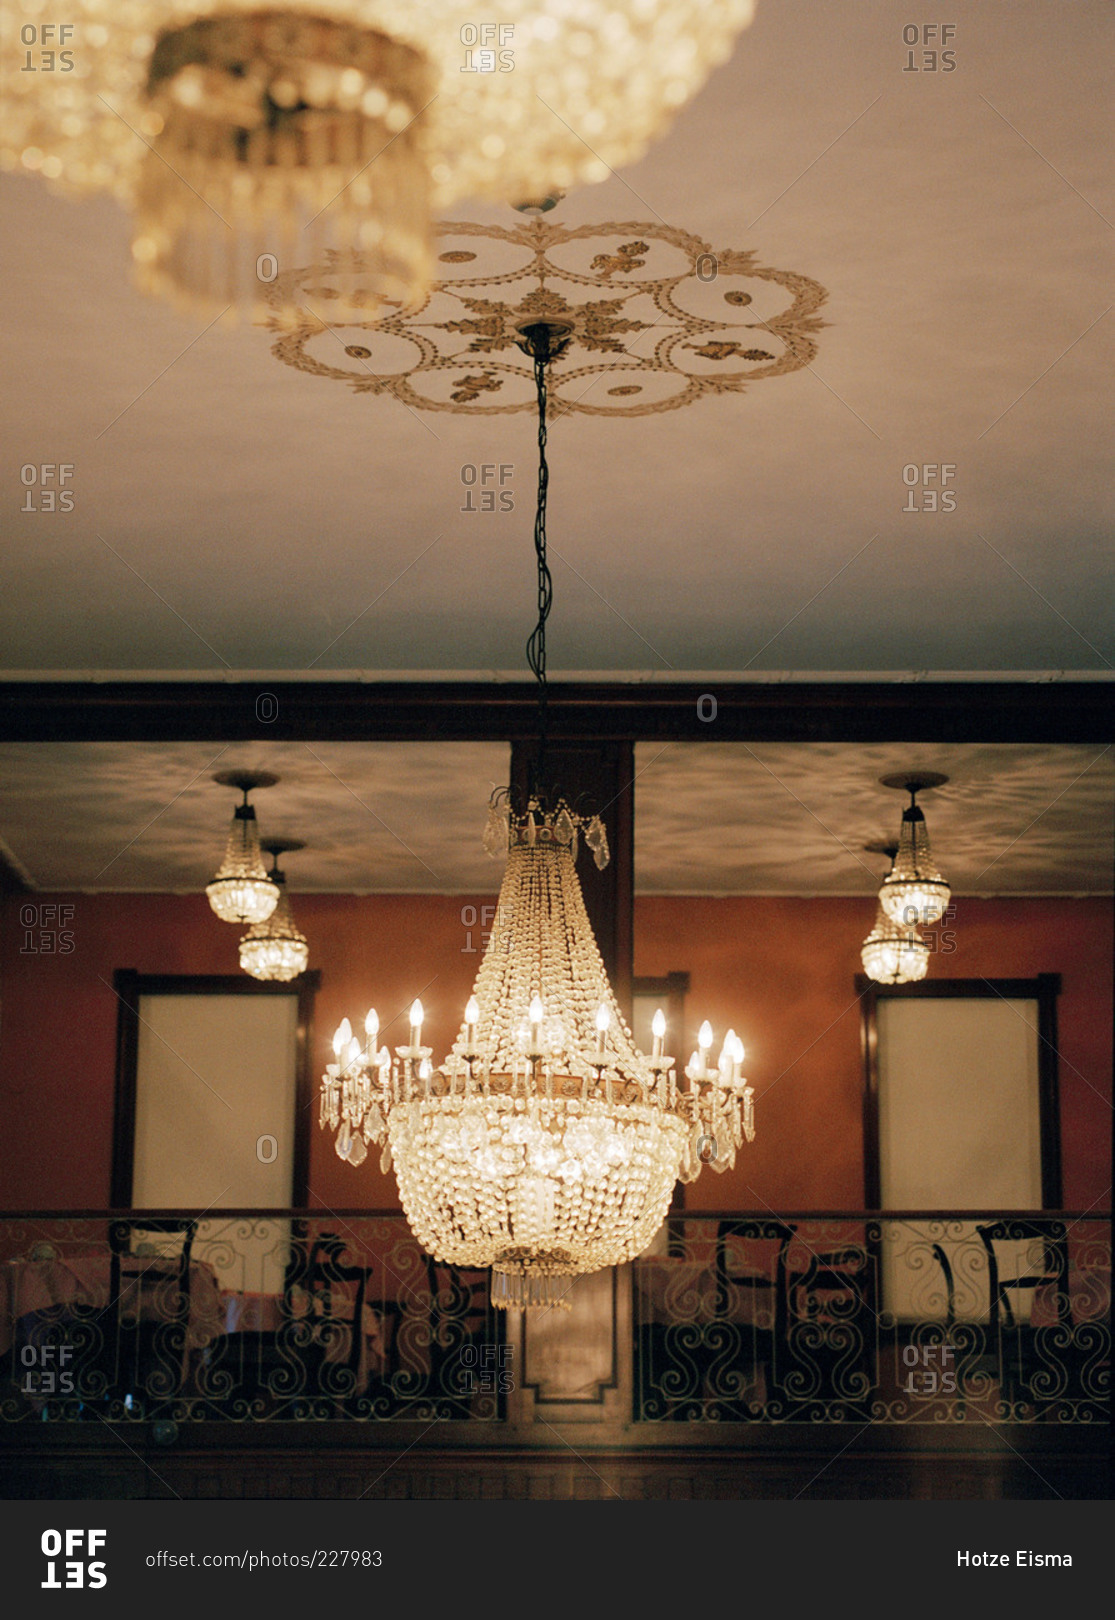 Ornate crystal chandelier and balcony in a dining room